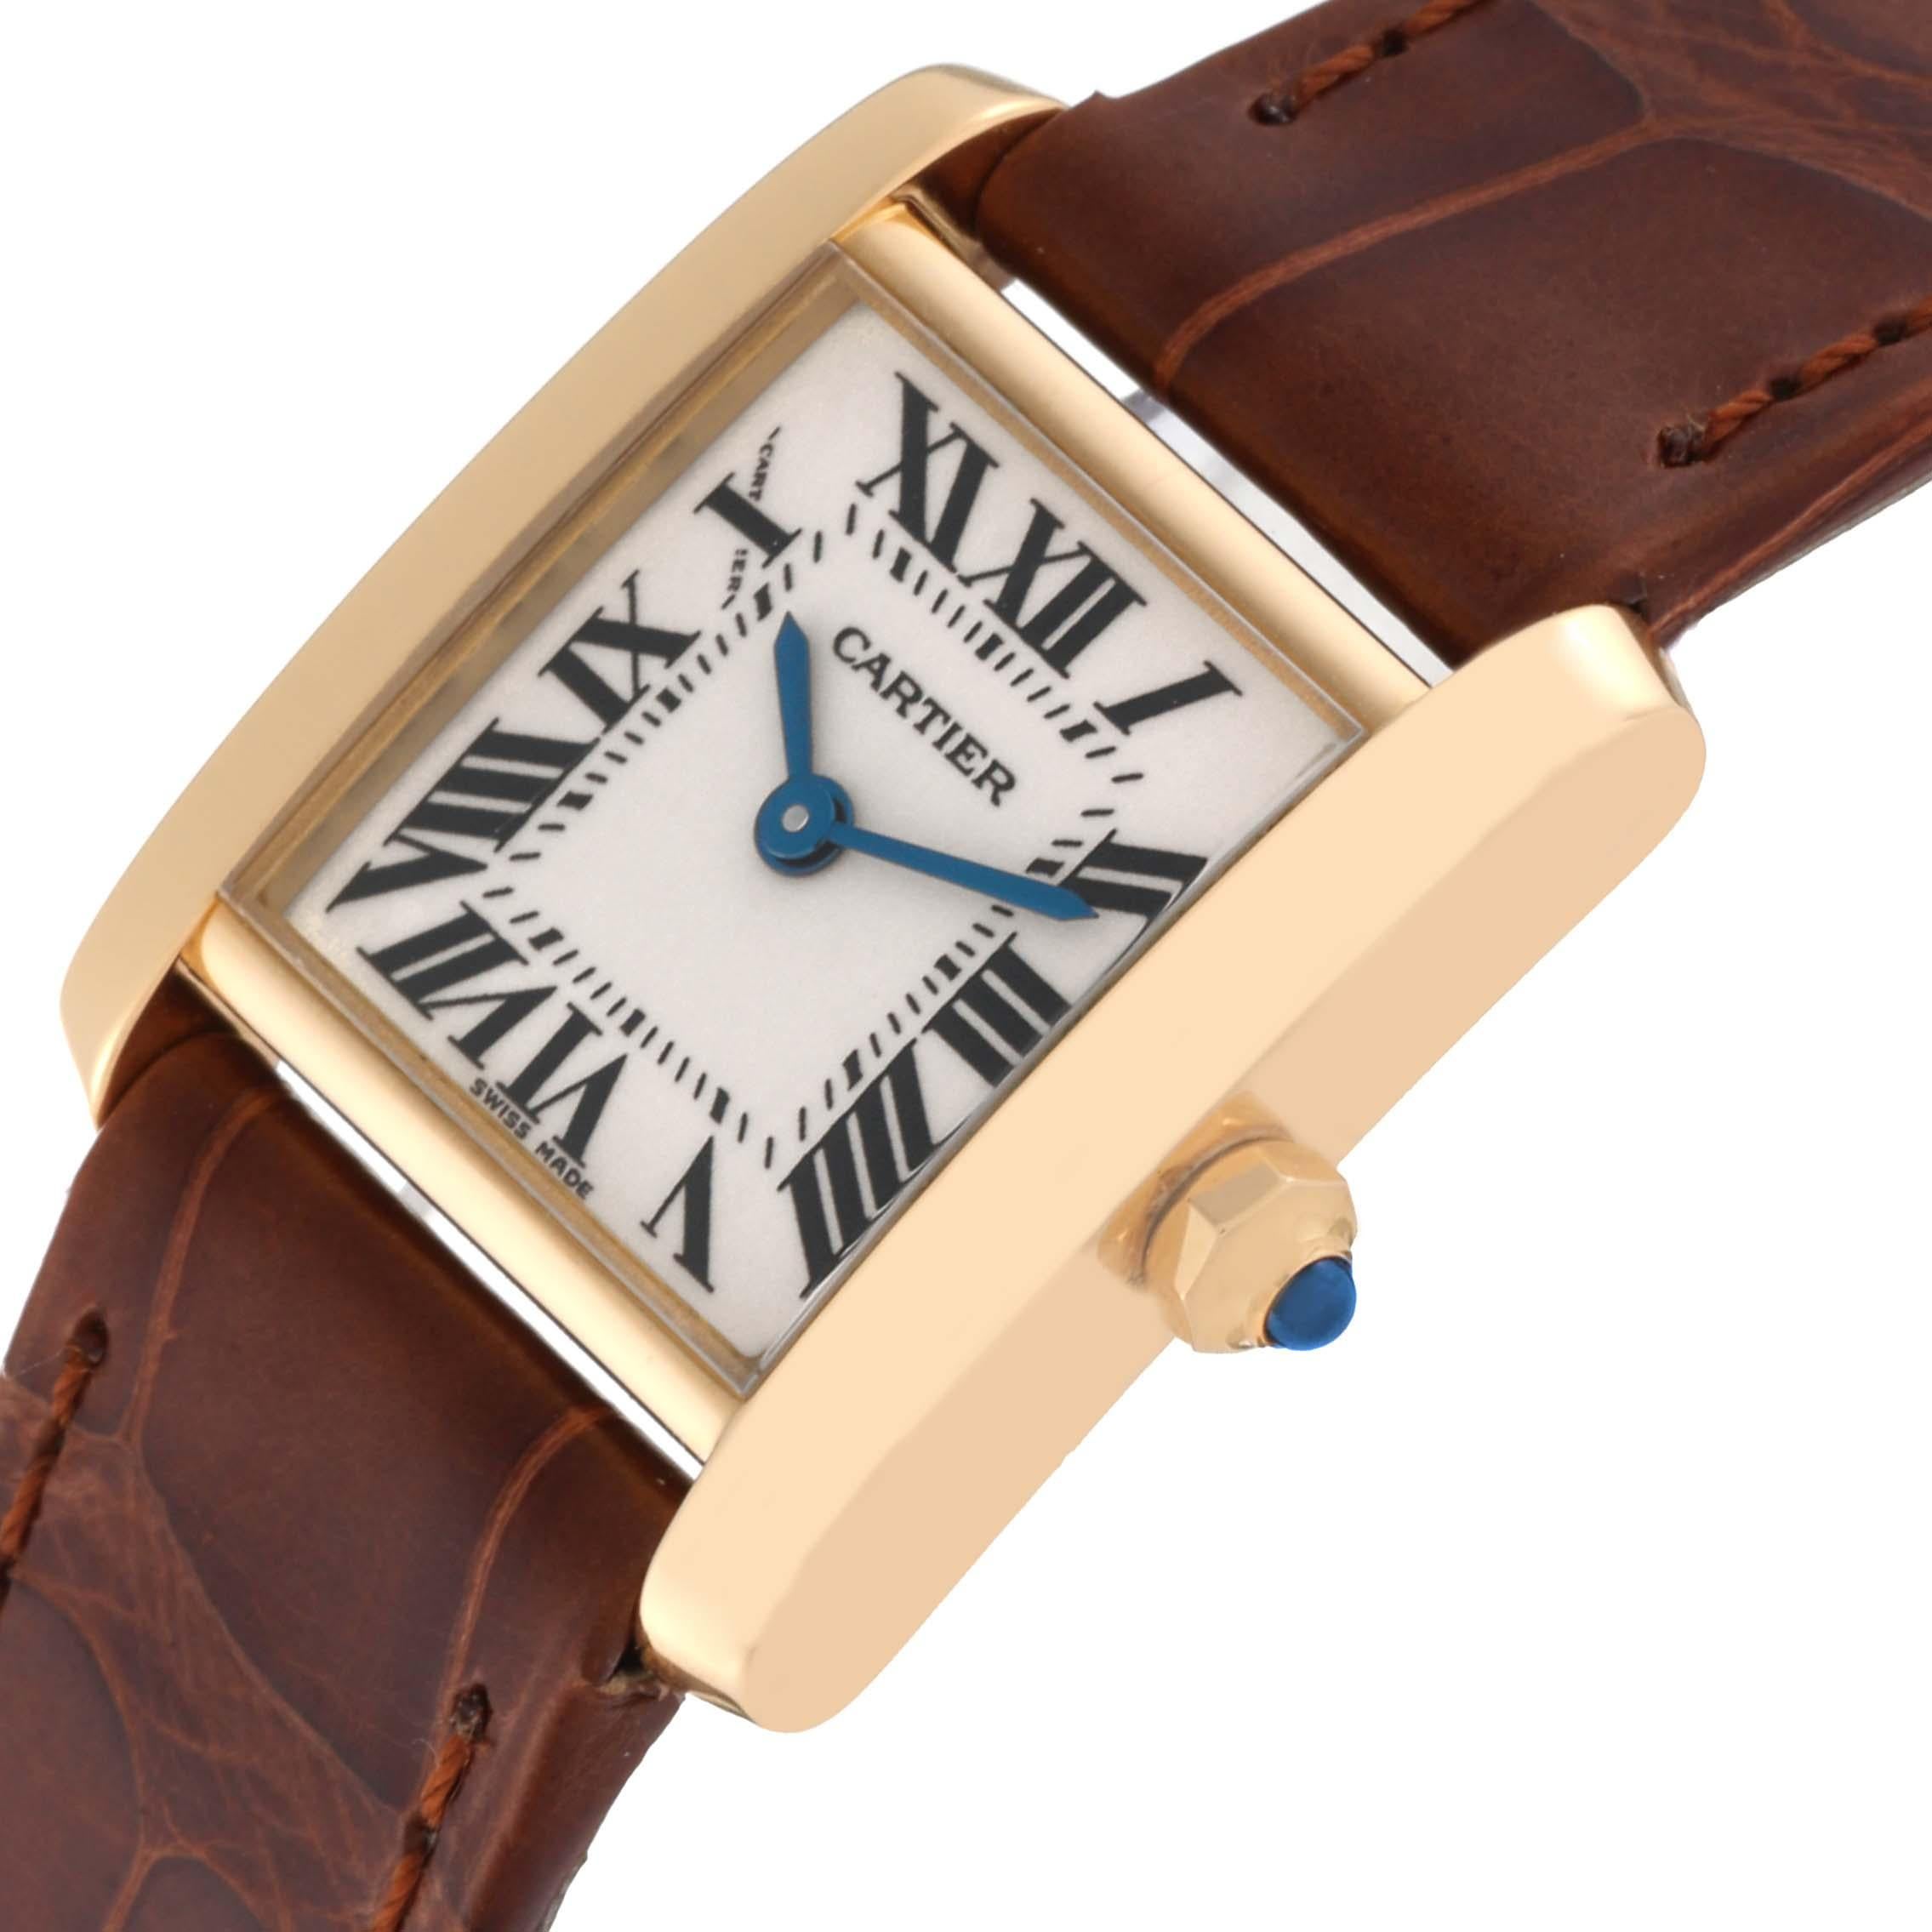 Cartier Tank Francaise Yellow Gold Brown Strap Ladies Watch W5000256 In Excellent Condition For Sale In Atlanta, GA